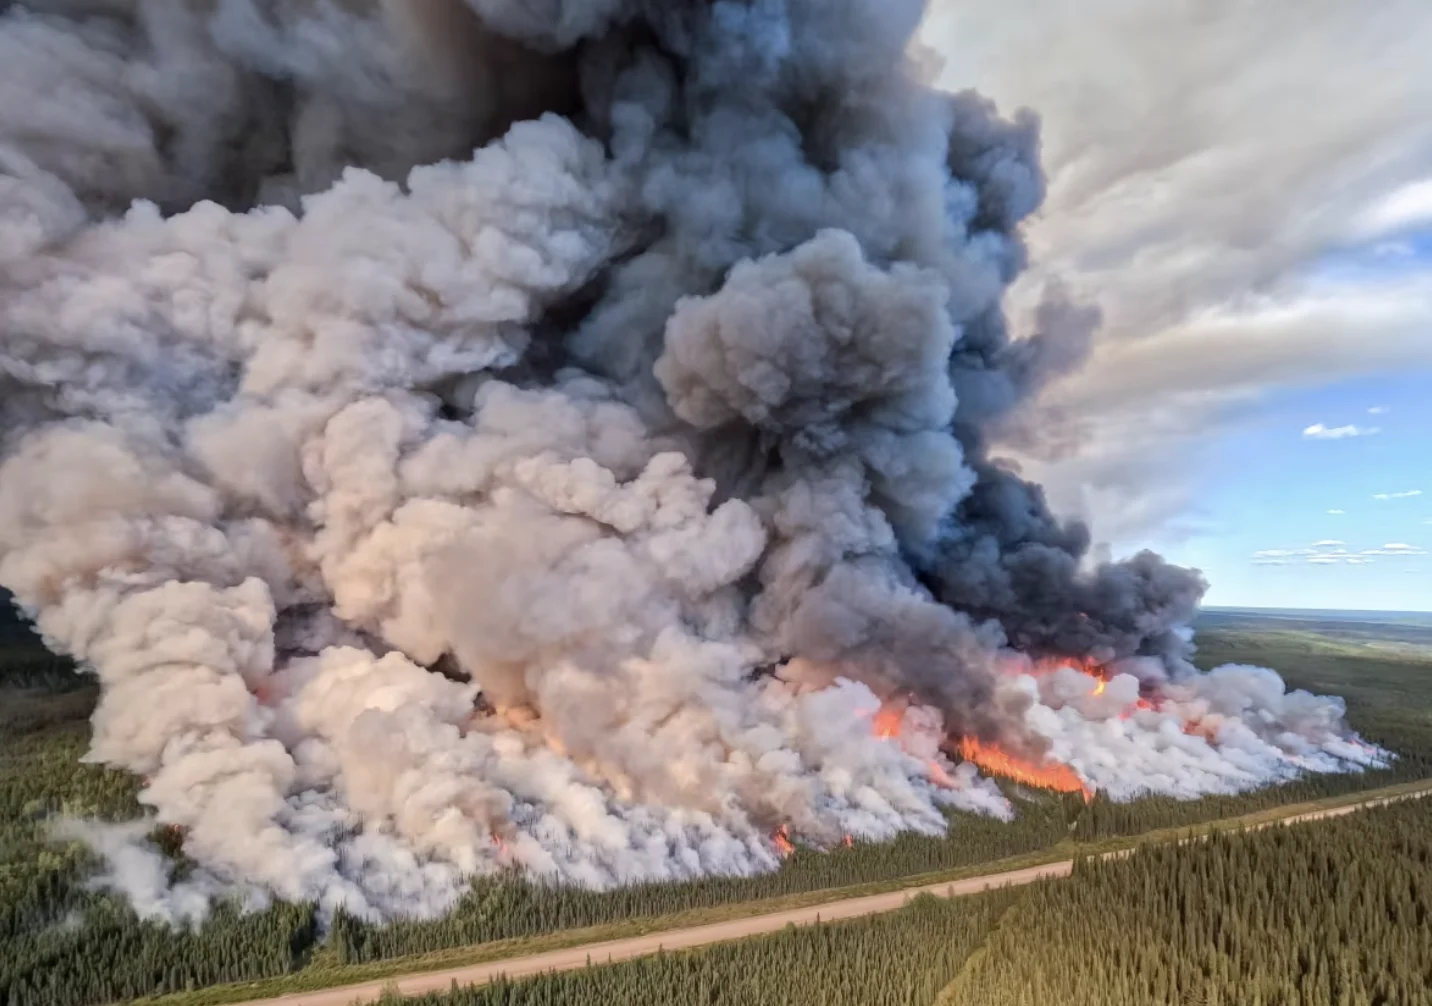 B.C. Wildfire Service: The Donnie Creek wildfire is burning north of Fort St. John, B.C. 2023. This massive blaze has scorched almost 6,000 square kilometres of land. (B.C. Wildfire Service)